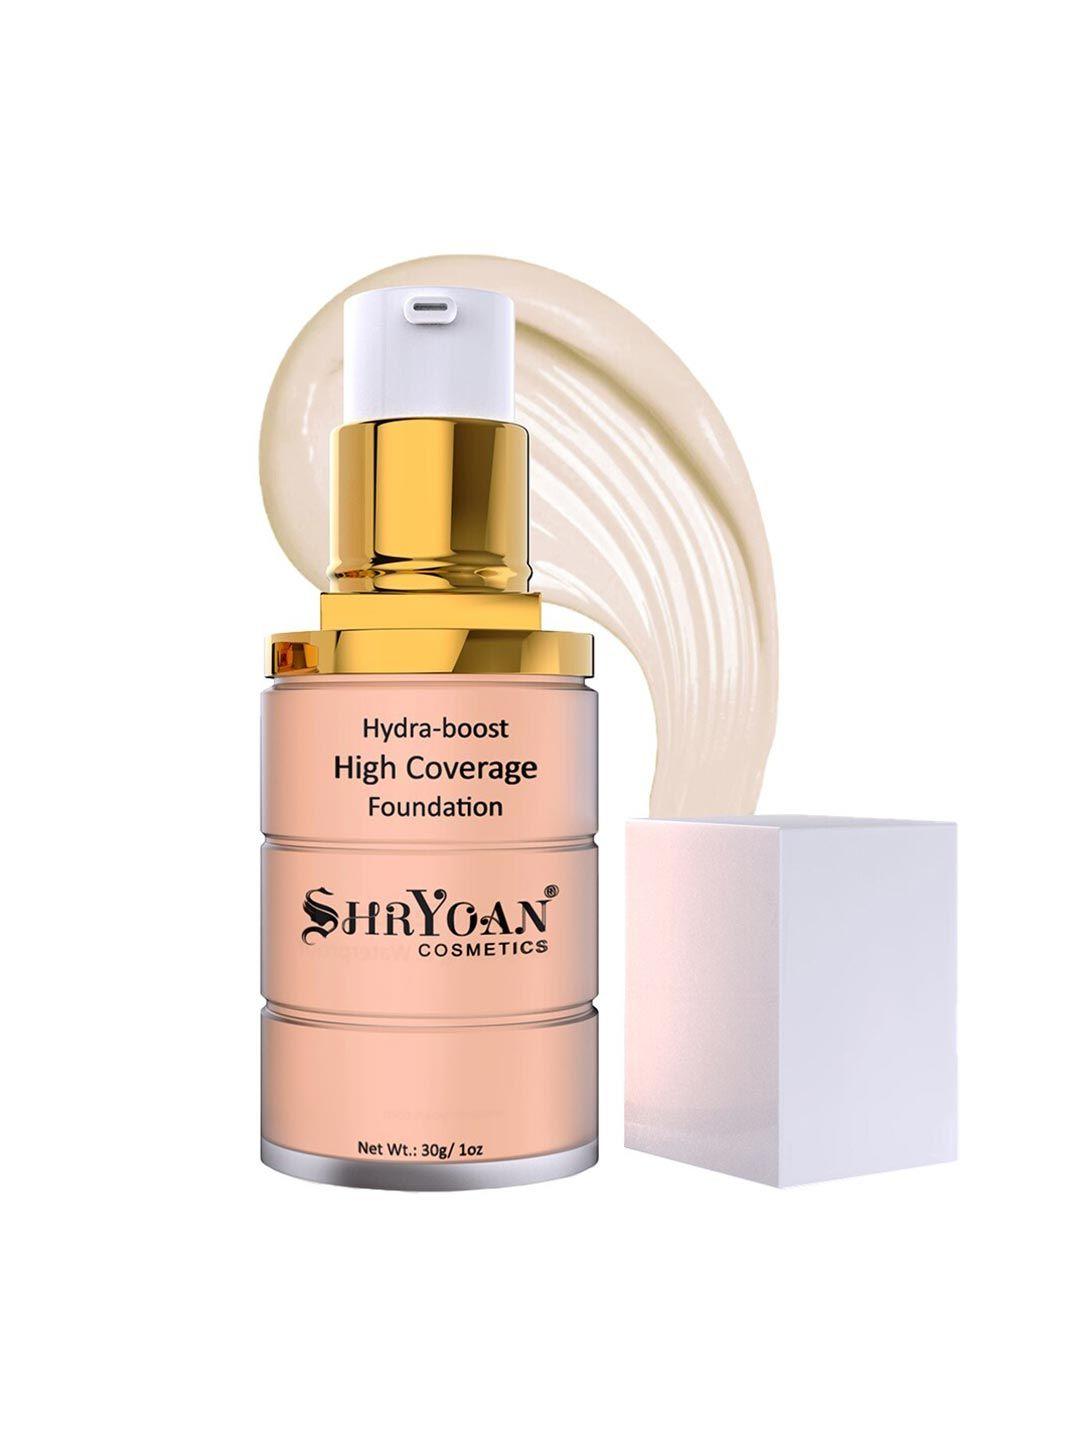 shryoan beige colored hydra-boost high coverage foundation